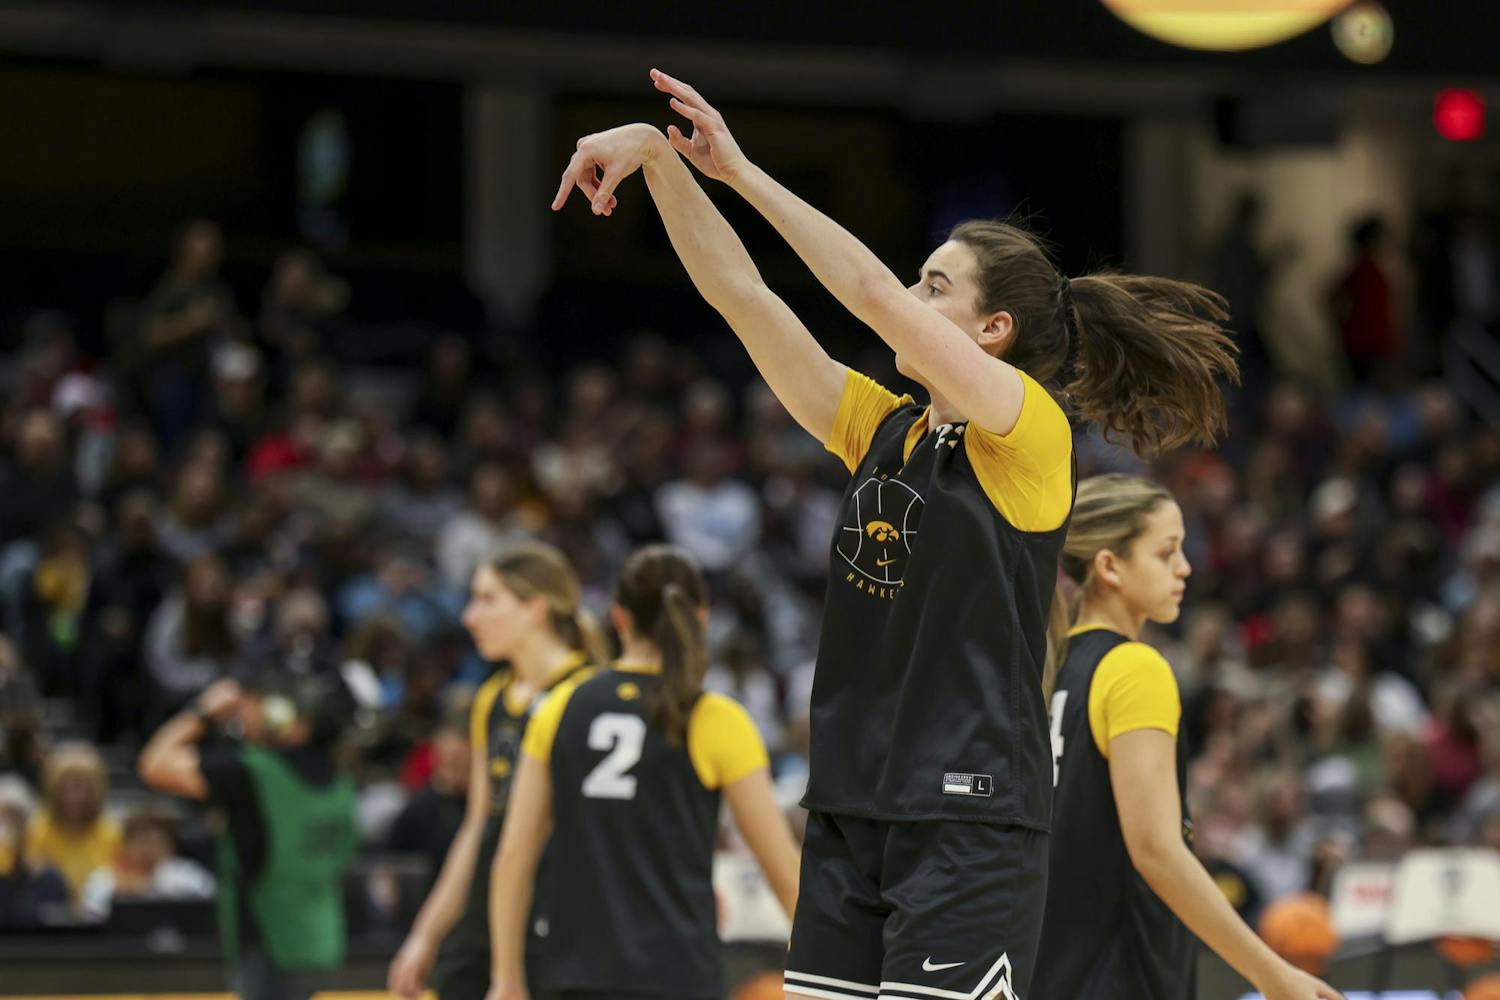 Hawkeye senior guard Caitlin Clark attempts a 3-point shot during Super Saturday open practice in Cleveland, Ohio. Clark scored 21 points for the Hawkeyes during their semifinal match-up against the University of Connecticut Huskies on April 5, 2024. The semifinal game marked the second time this season that Clark did not lead the Hawkeyes in scoring.